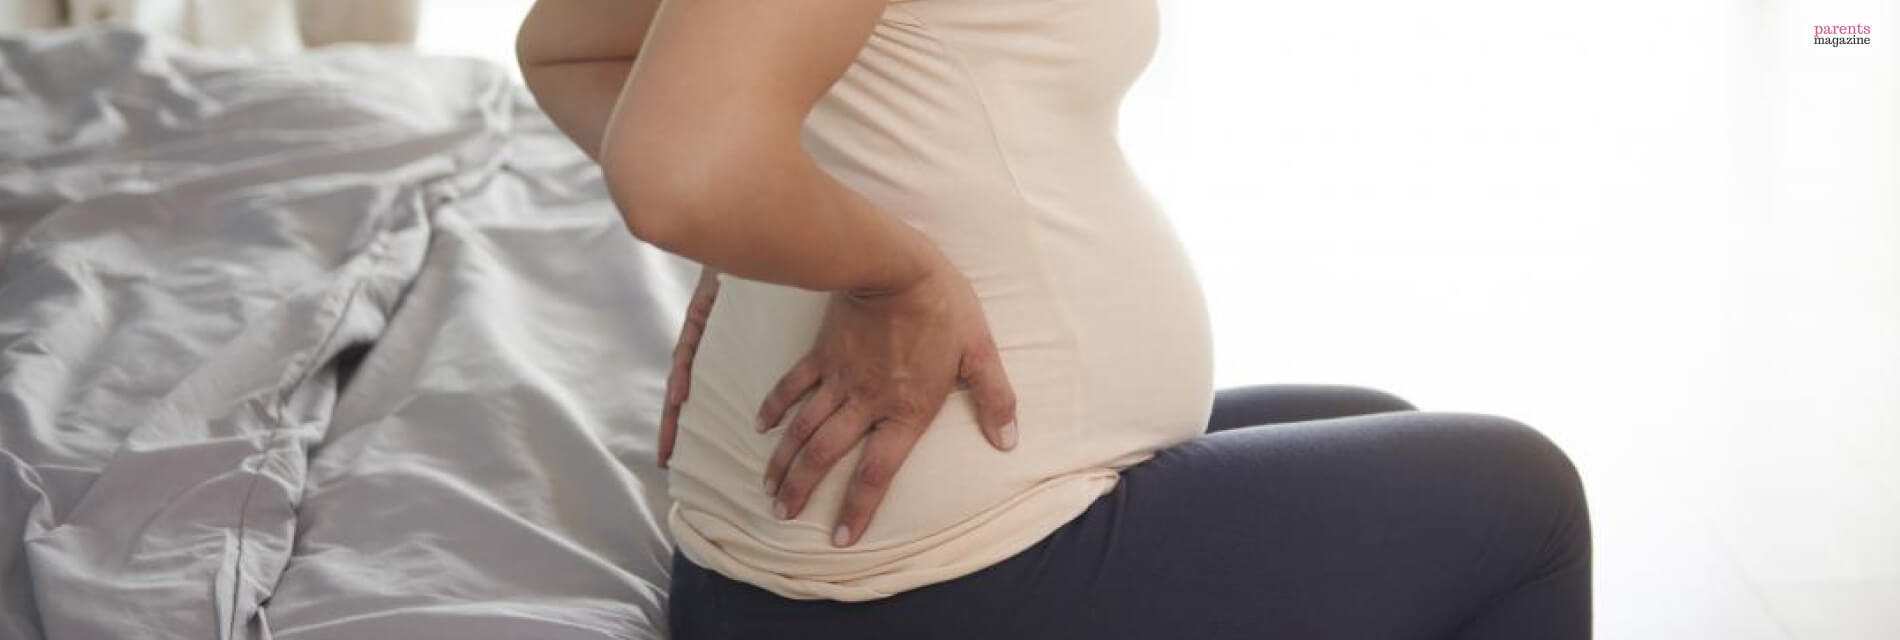 Butt Pain During Pregnancy